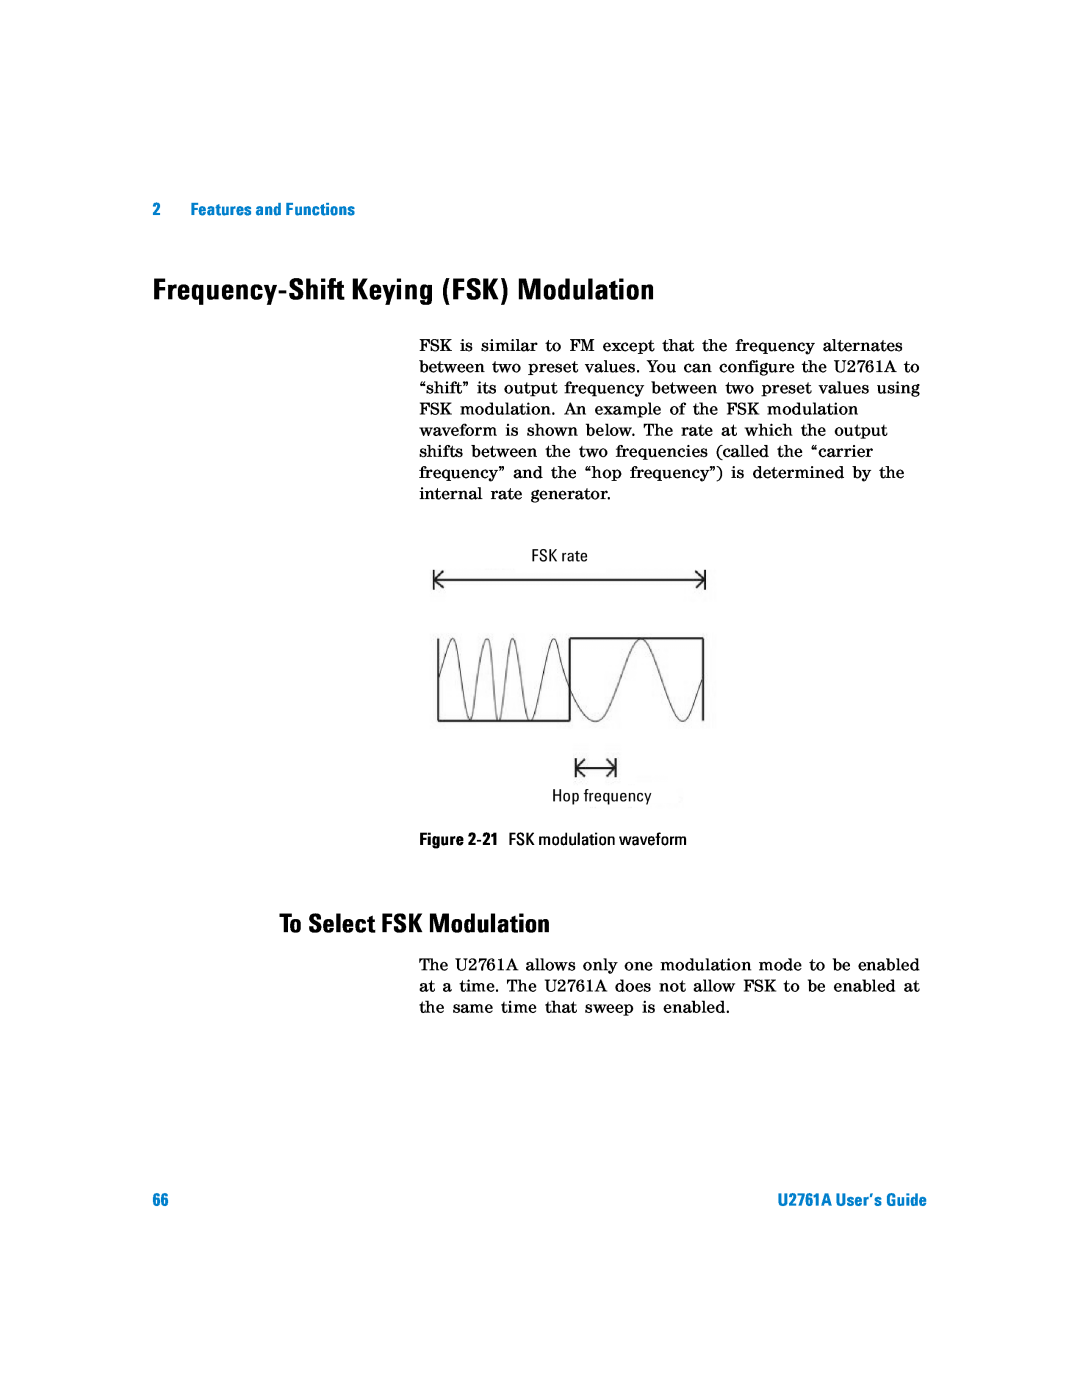 Agilent Technologies U2761A manual Frequency-Shift Keying FSK Modulation, To Select FSK Modulation, Features and Functions 